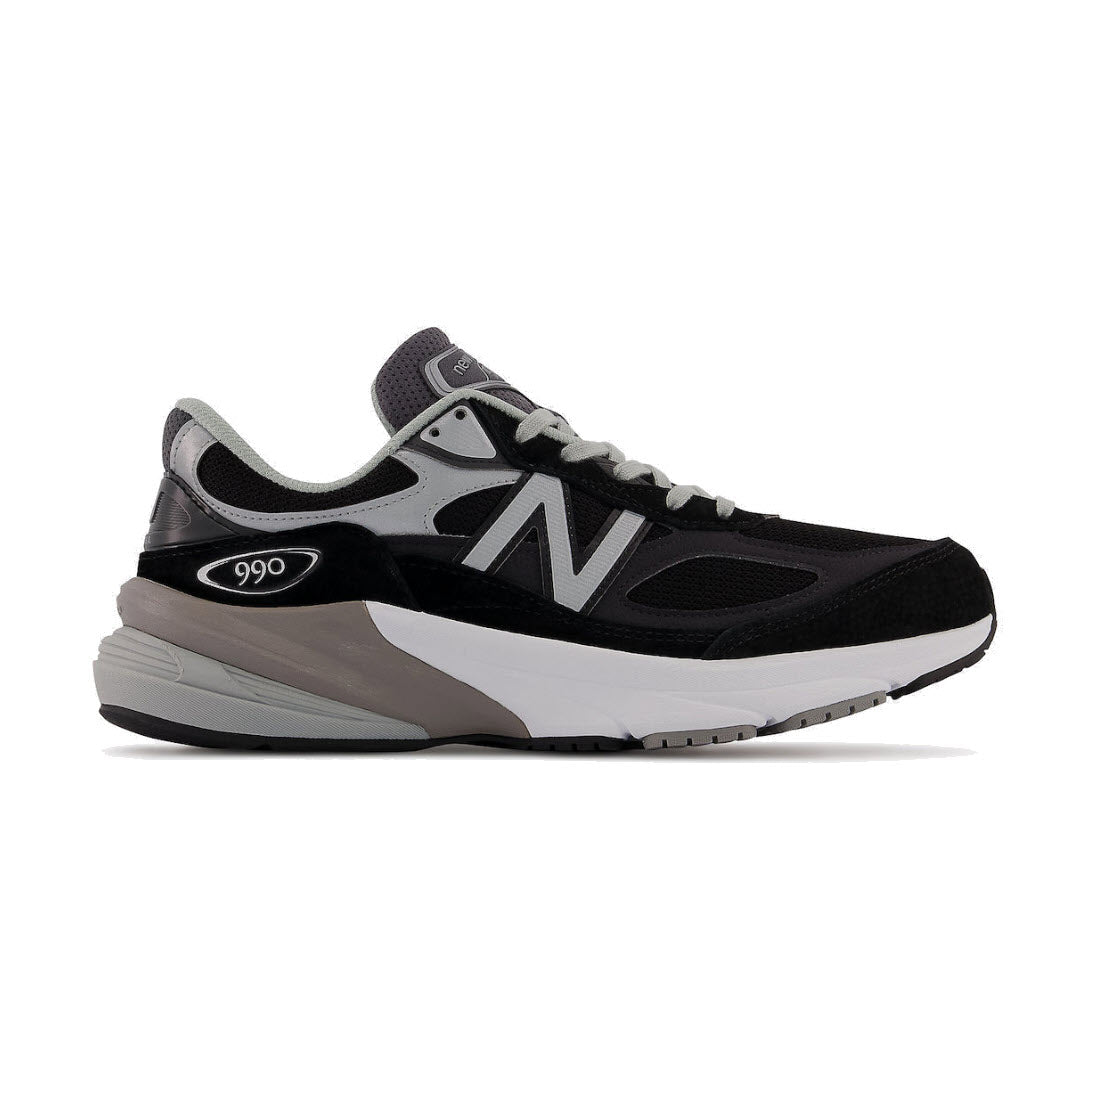 A New Balance 990v6 sneaker in black and gray, showing a side profile with visible branding.